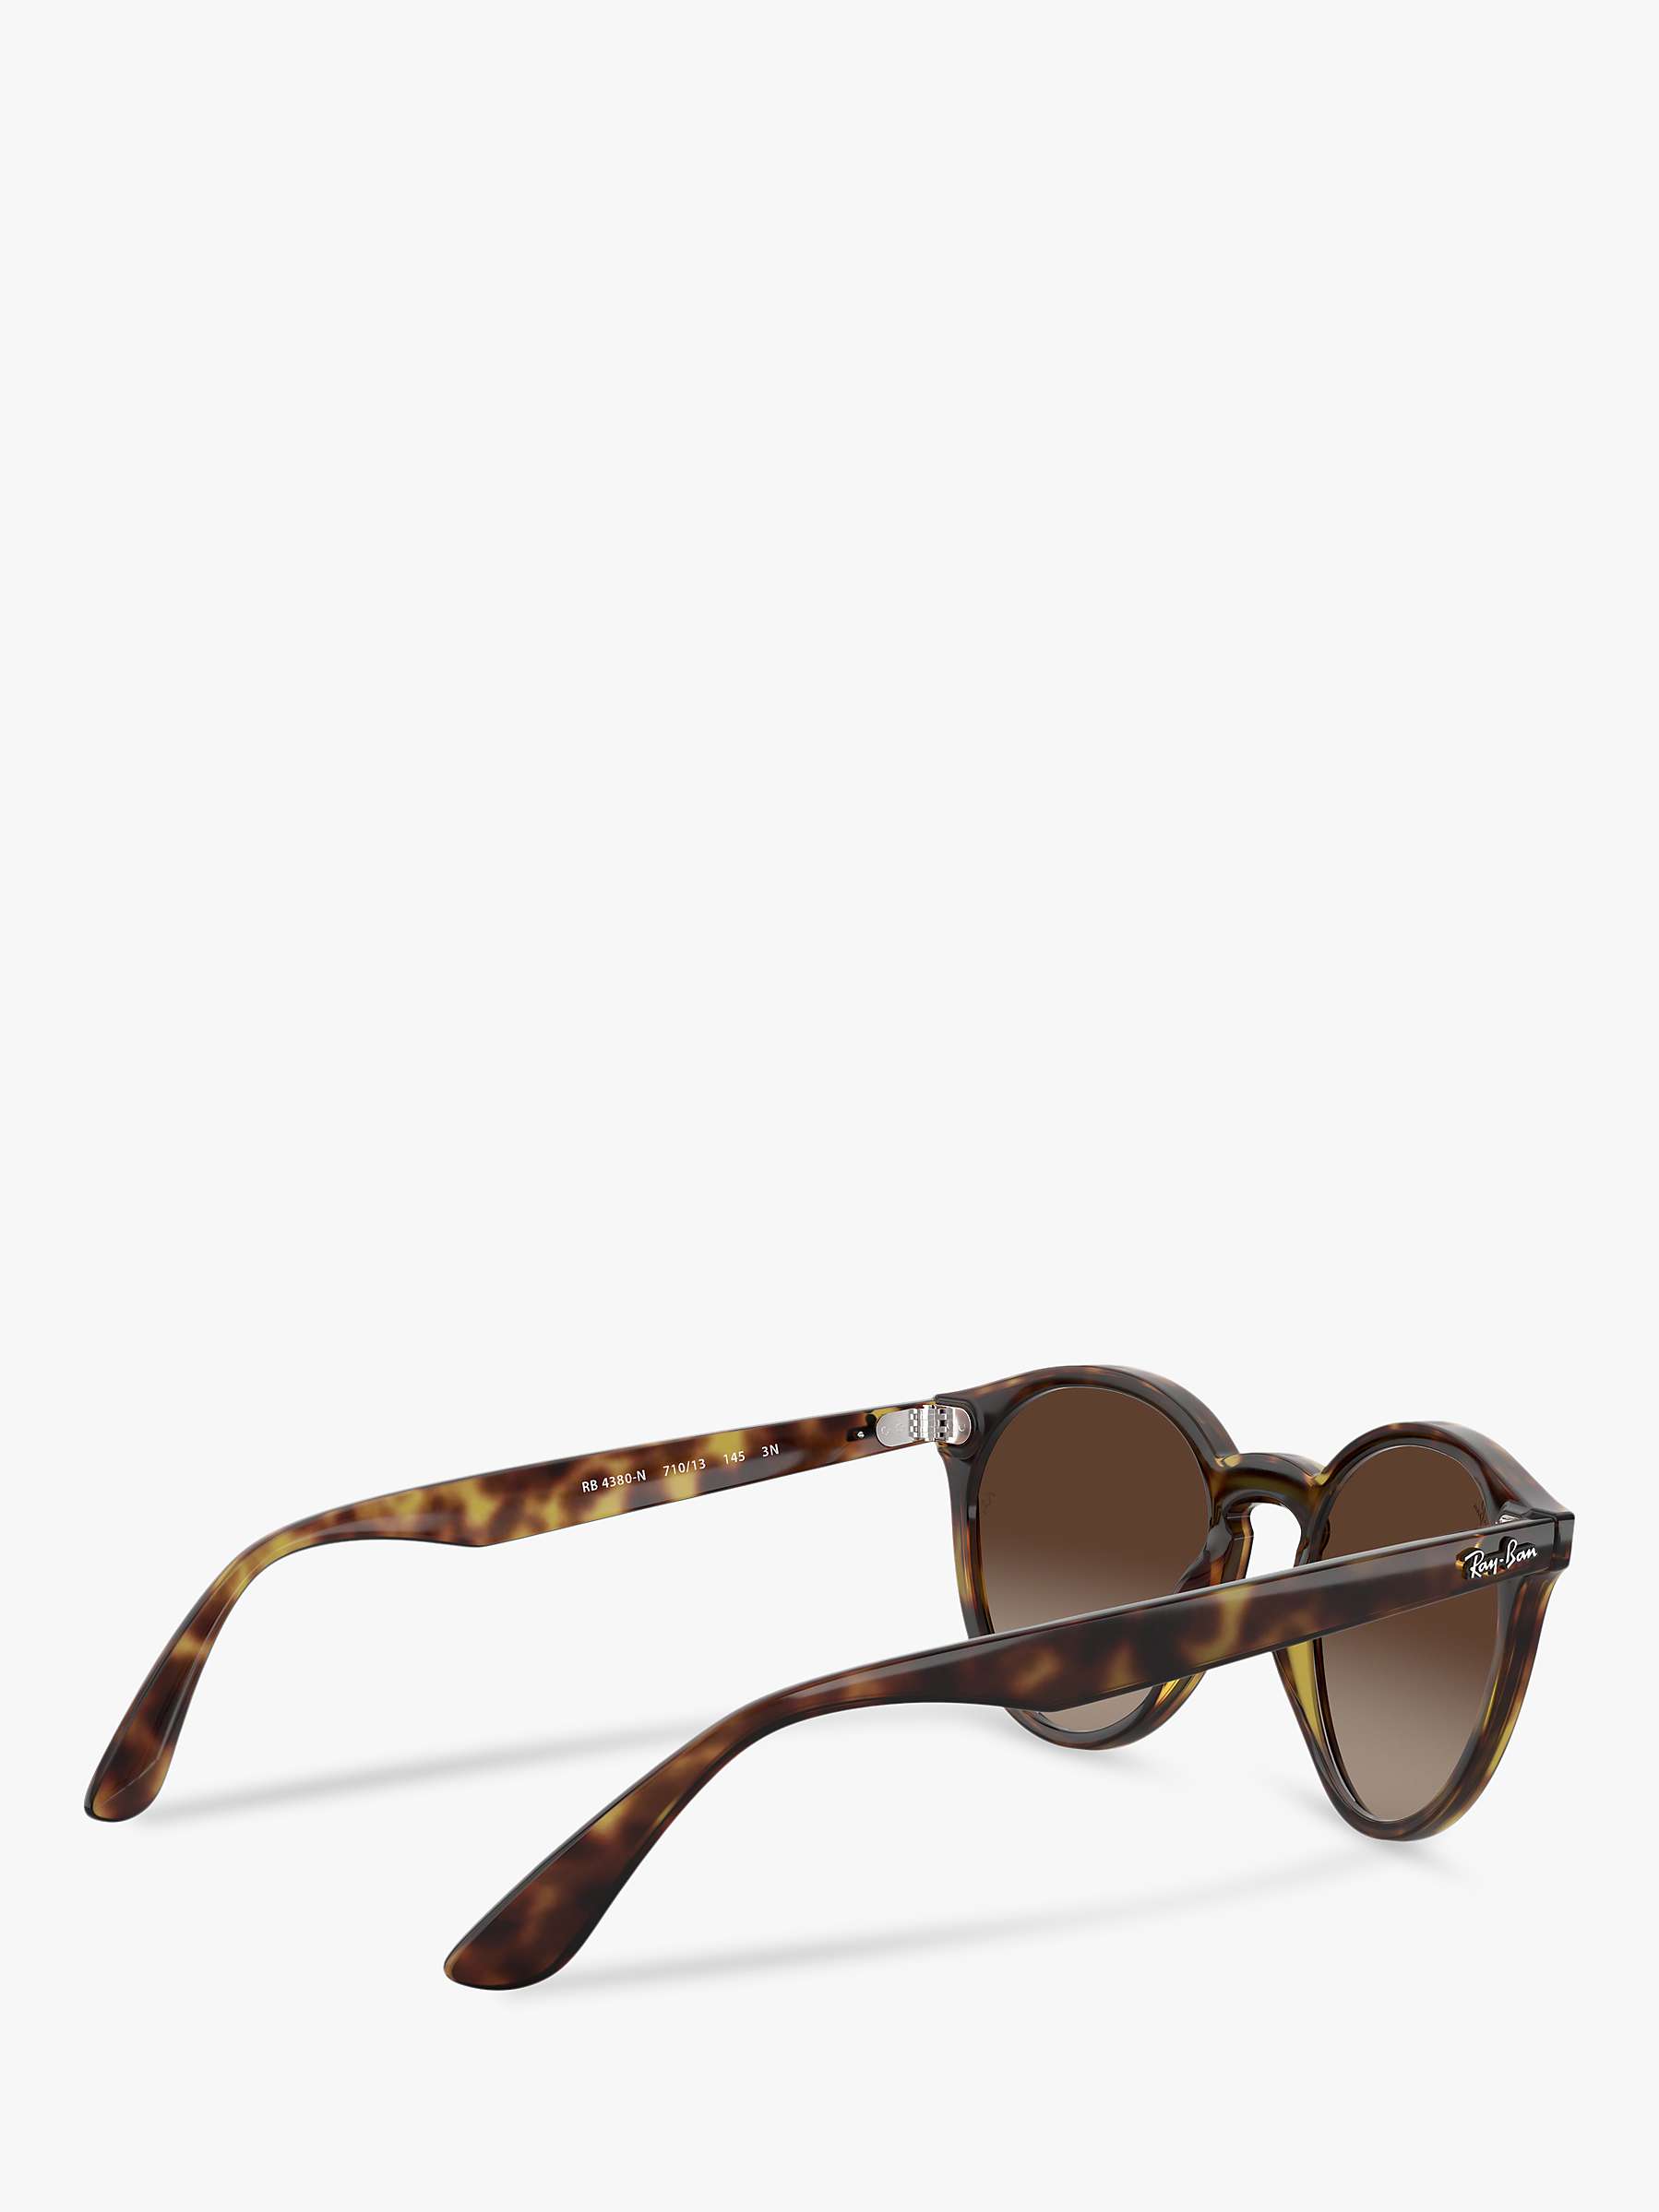 Buy Ray-Ban RB4380N Unisex Oval Sunglasses Online at johnlewis.com